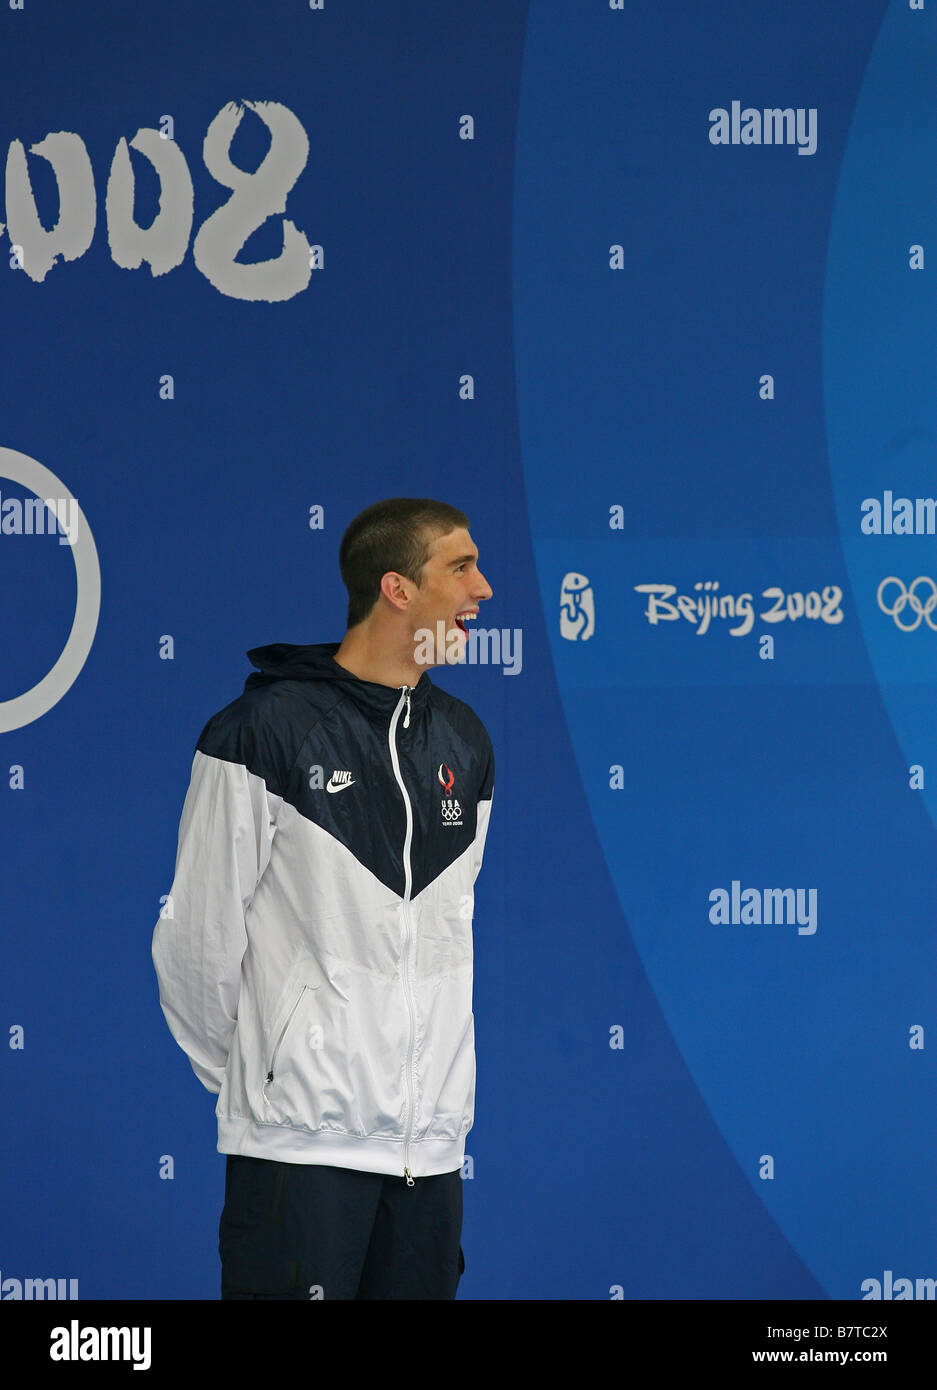 Michael Phelps laughs during the medal ceremony of one of his eight gold medals at the Beijing Olympic Games Stock Photo